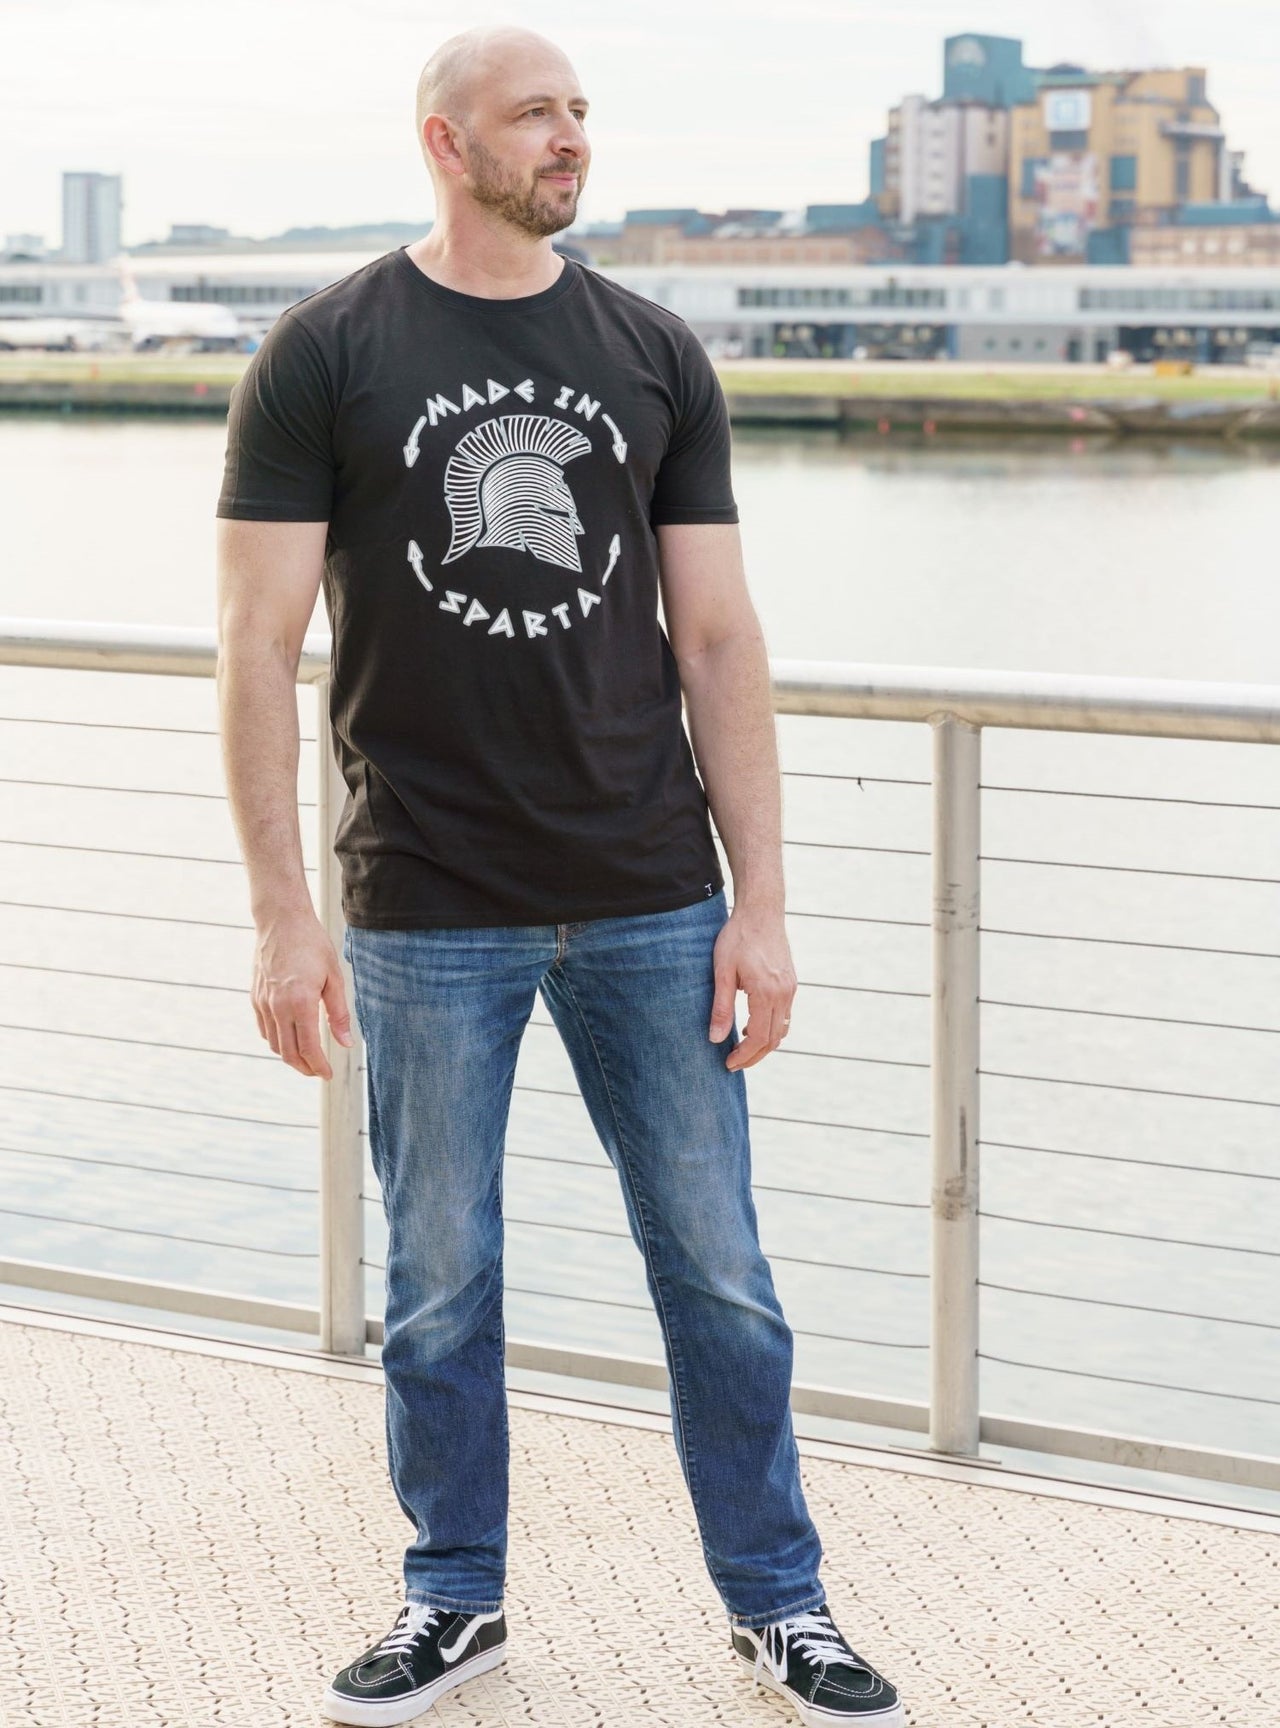 A head to toe shot of a tall skinny guy wearing a tall slim graphic t-shirt.